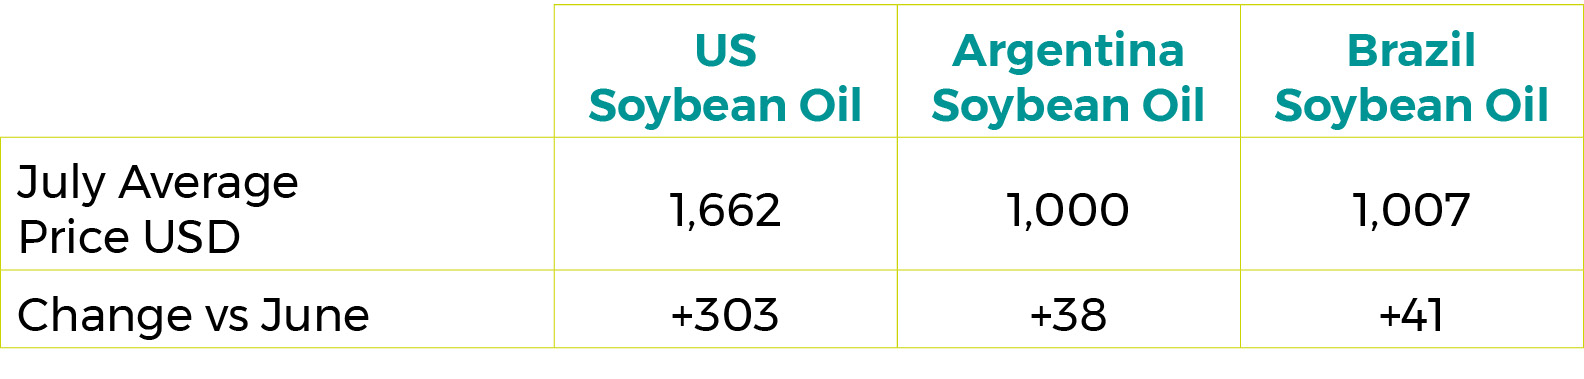 Soybean Oil  Export Prices $/tonne Sept 23